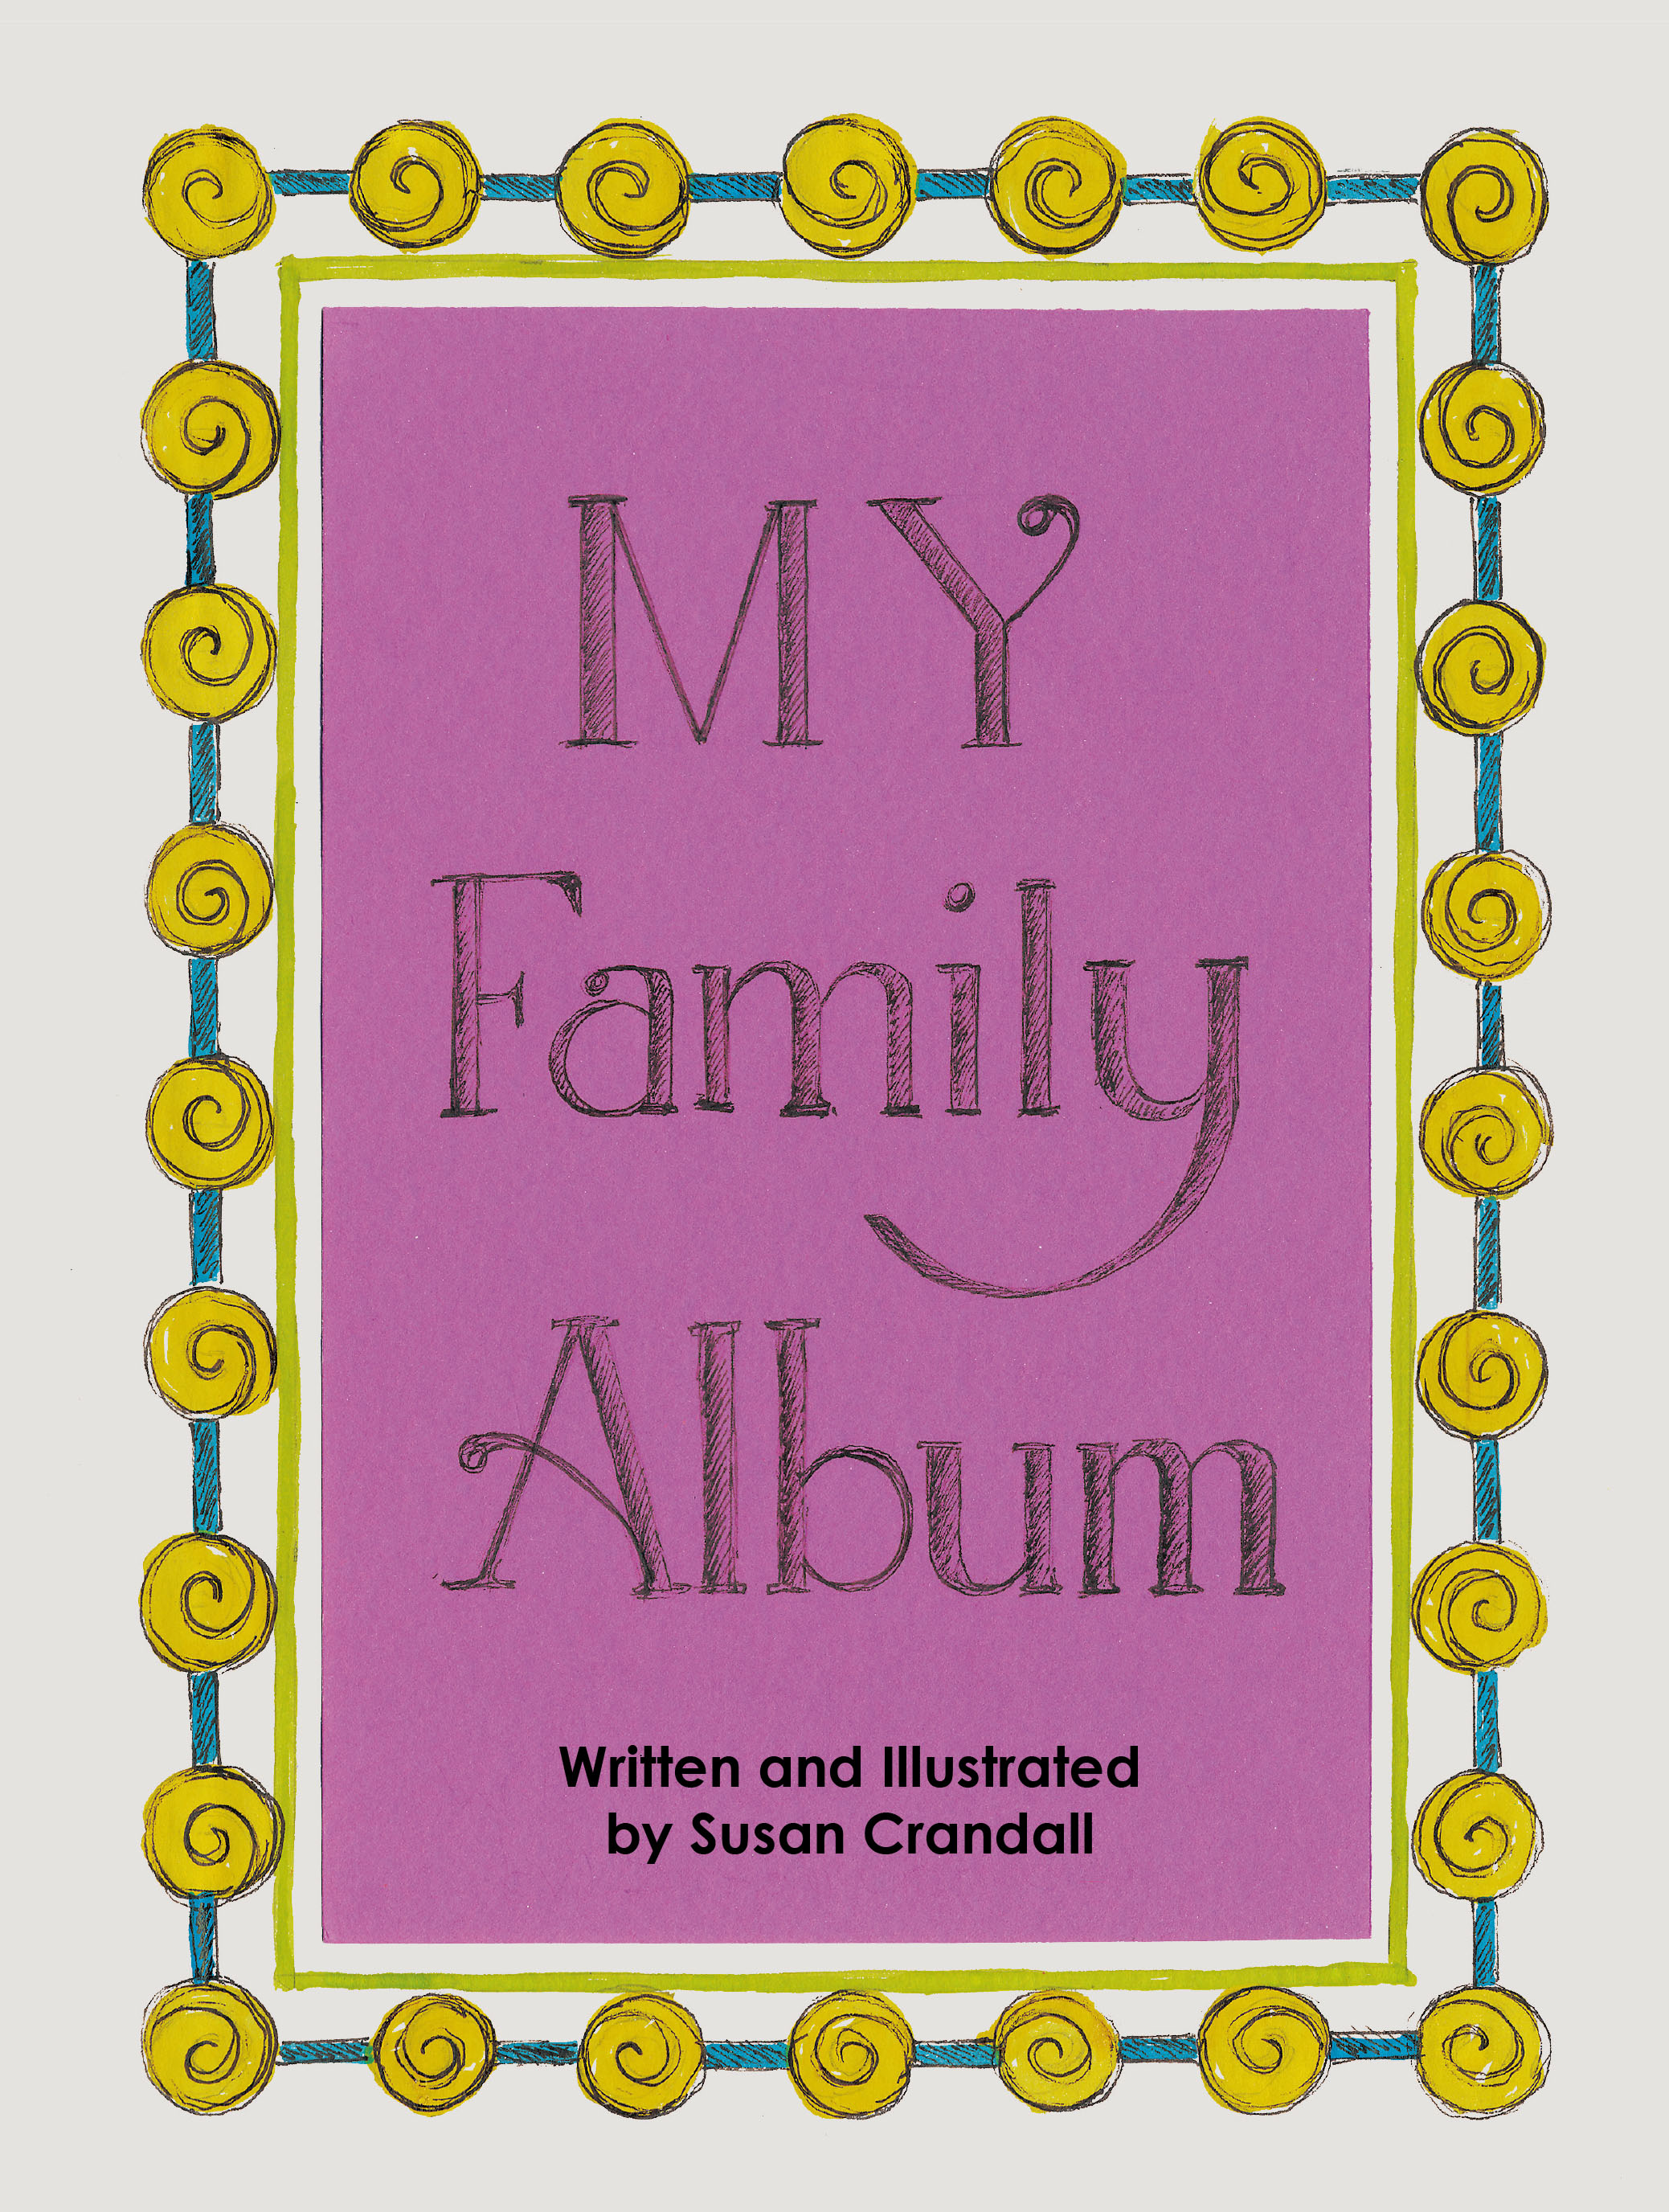 Susan Crandall’s New Book, "My Family Album," is an Adorable Tale That Takes a Look at a Large Family, with Each Member More Eccentric and Unconventional Than the Next